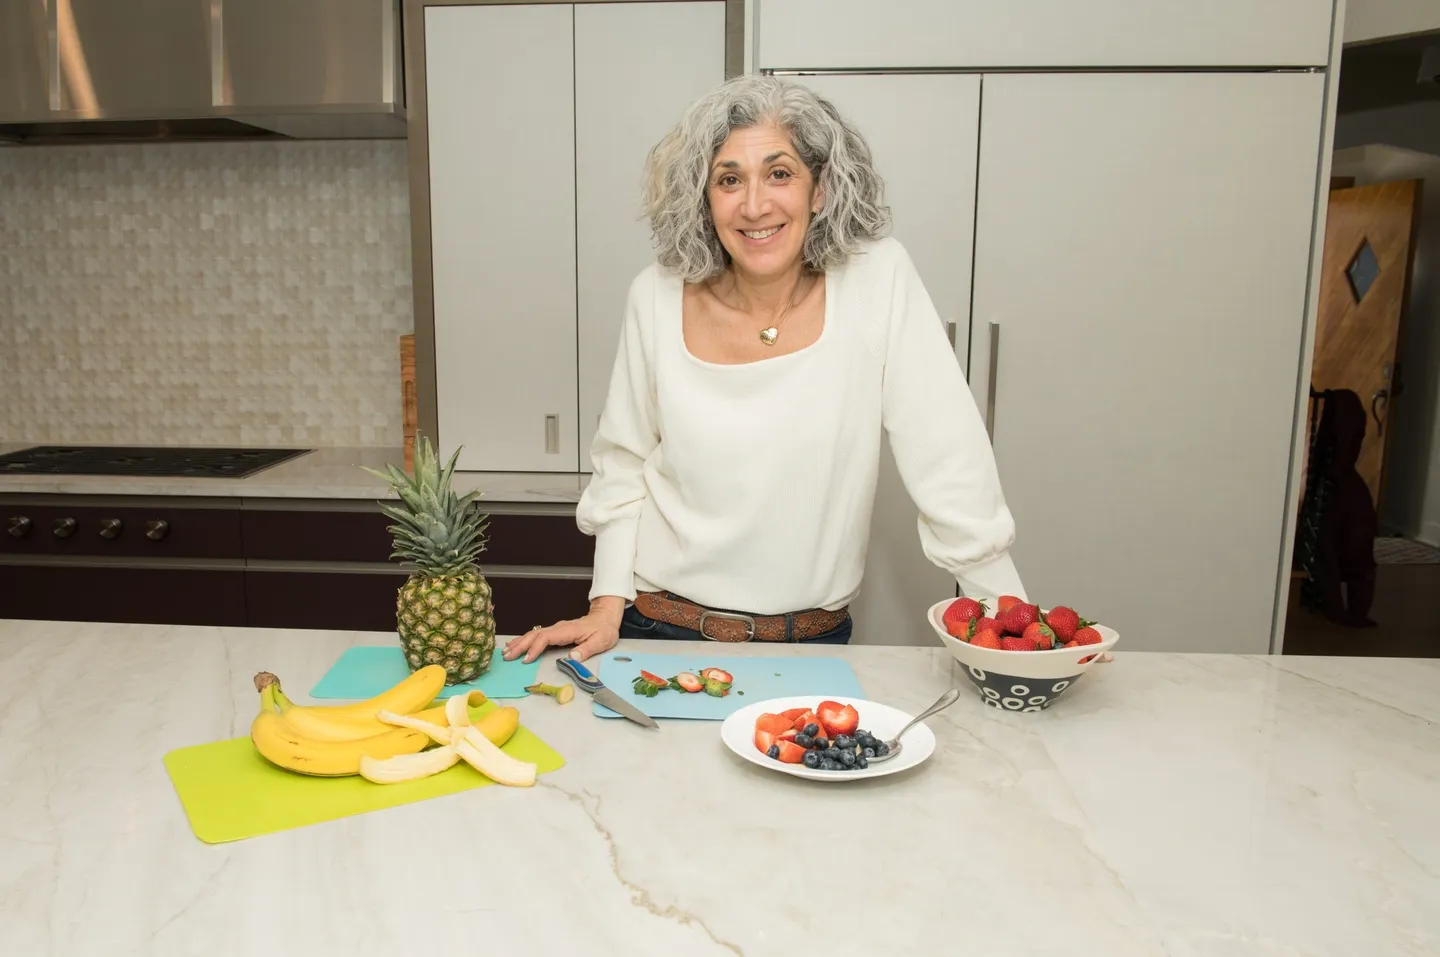 A woman standing in front of some fruit on the counter.